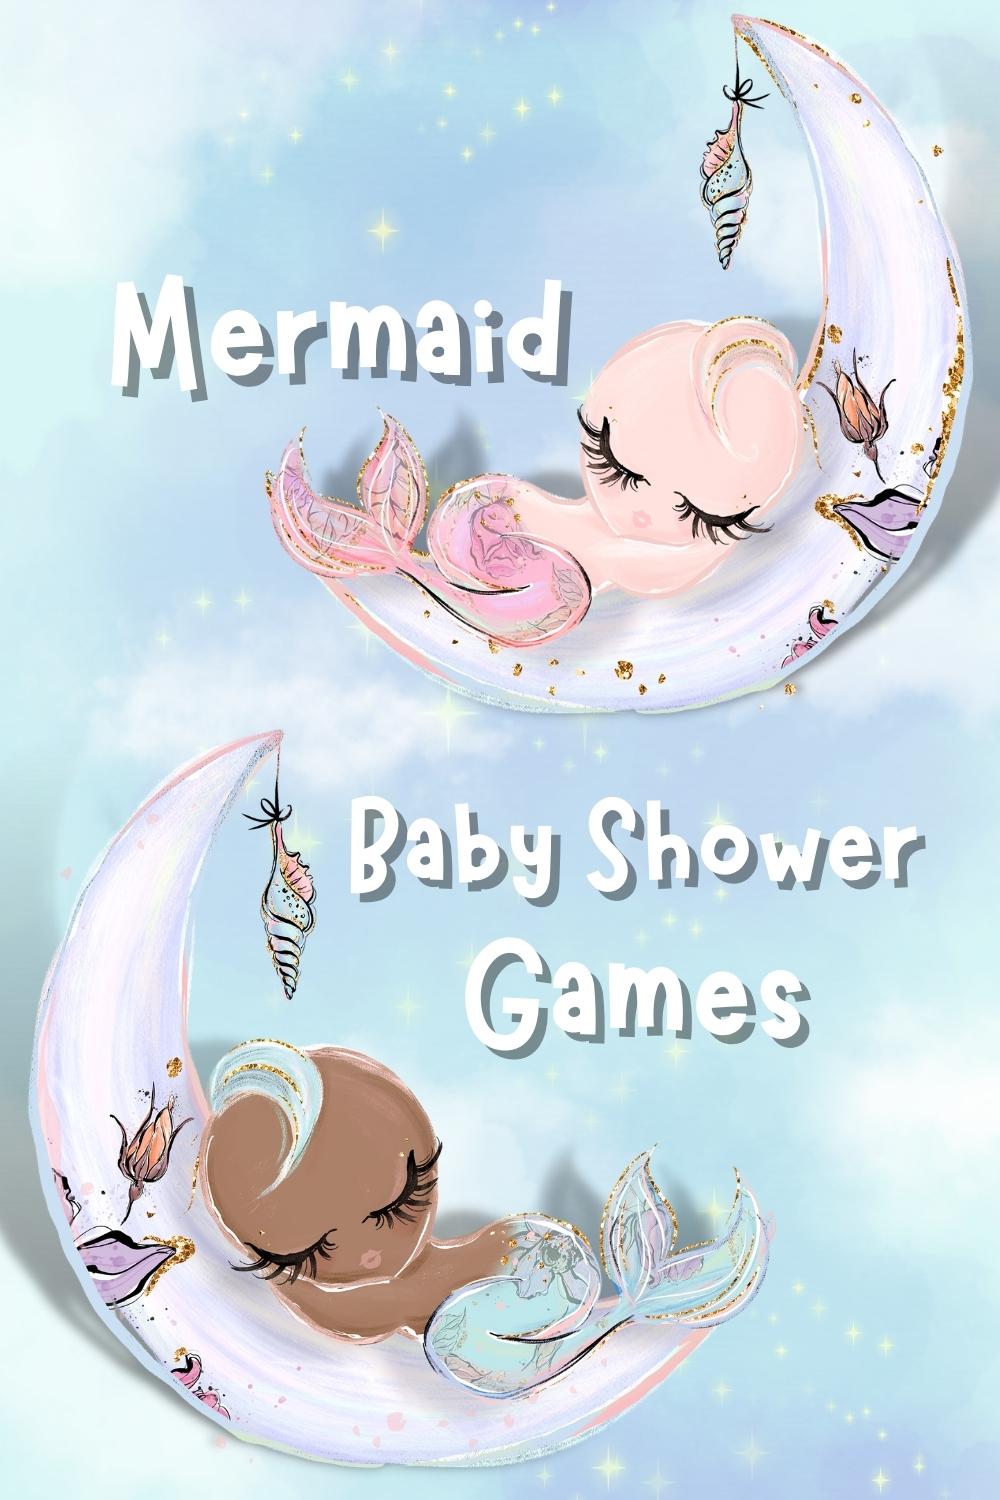 Printable mermaid baby shower games for moms-to-be with word search and word scramble puzzles.